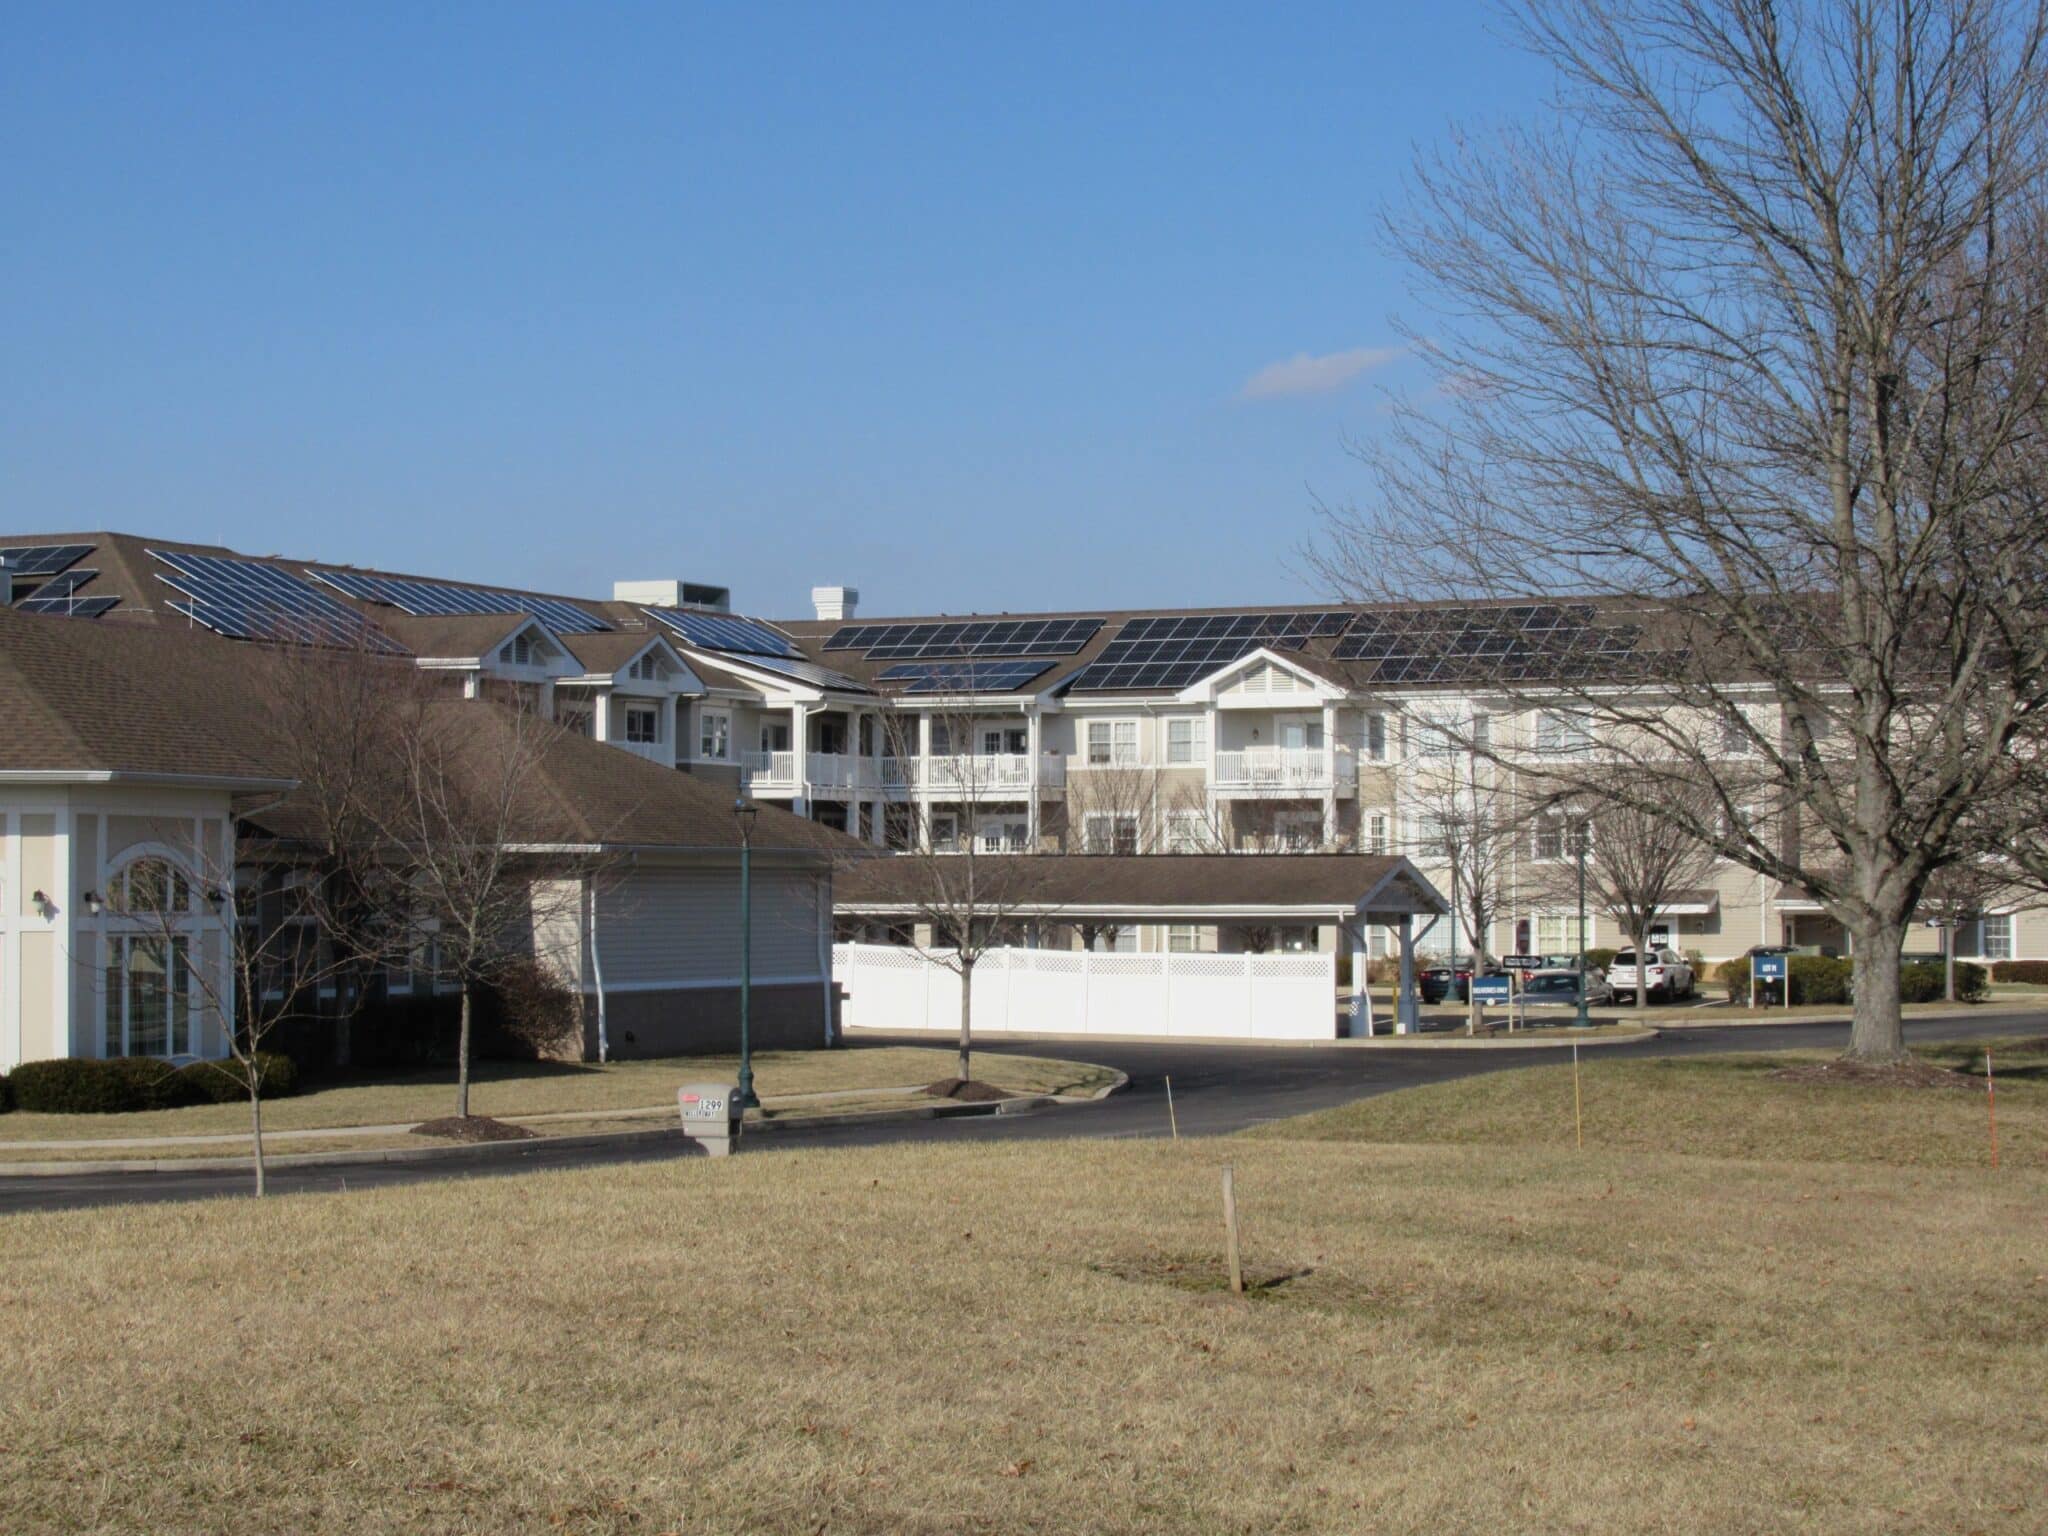 Solar panels on the roof of a Carroll Lutheran Village apartment building.